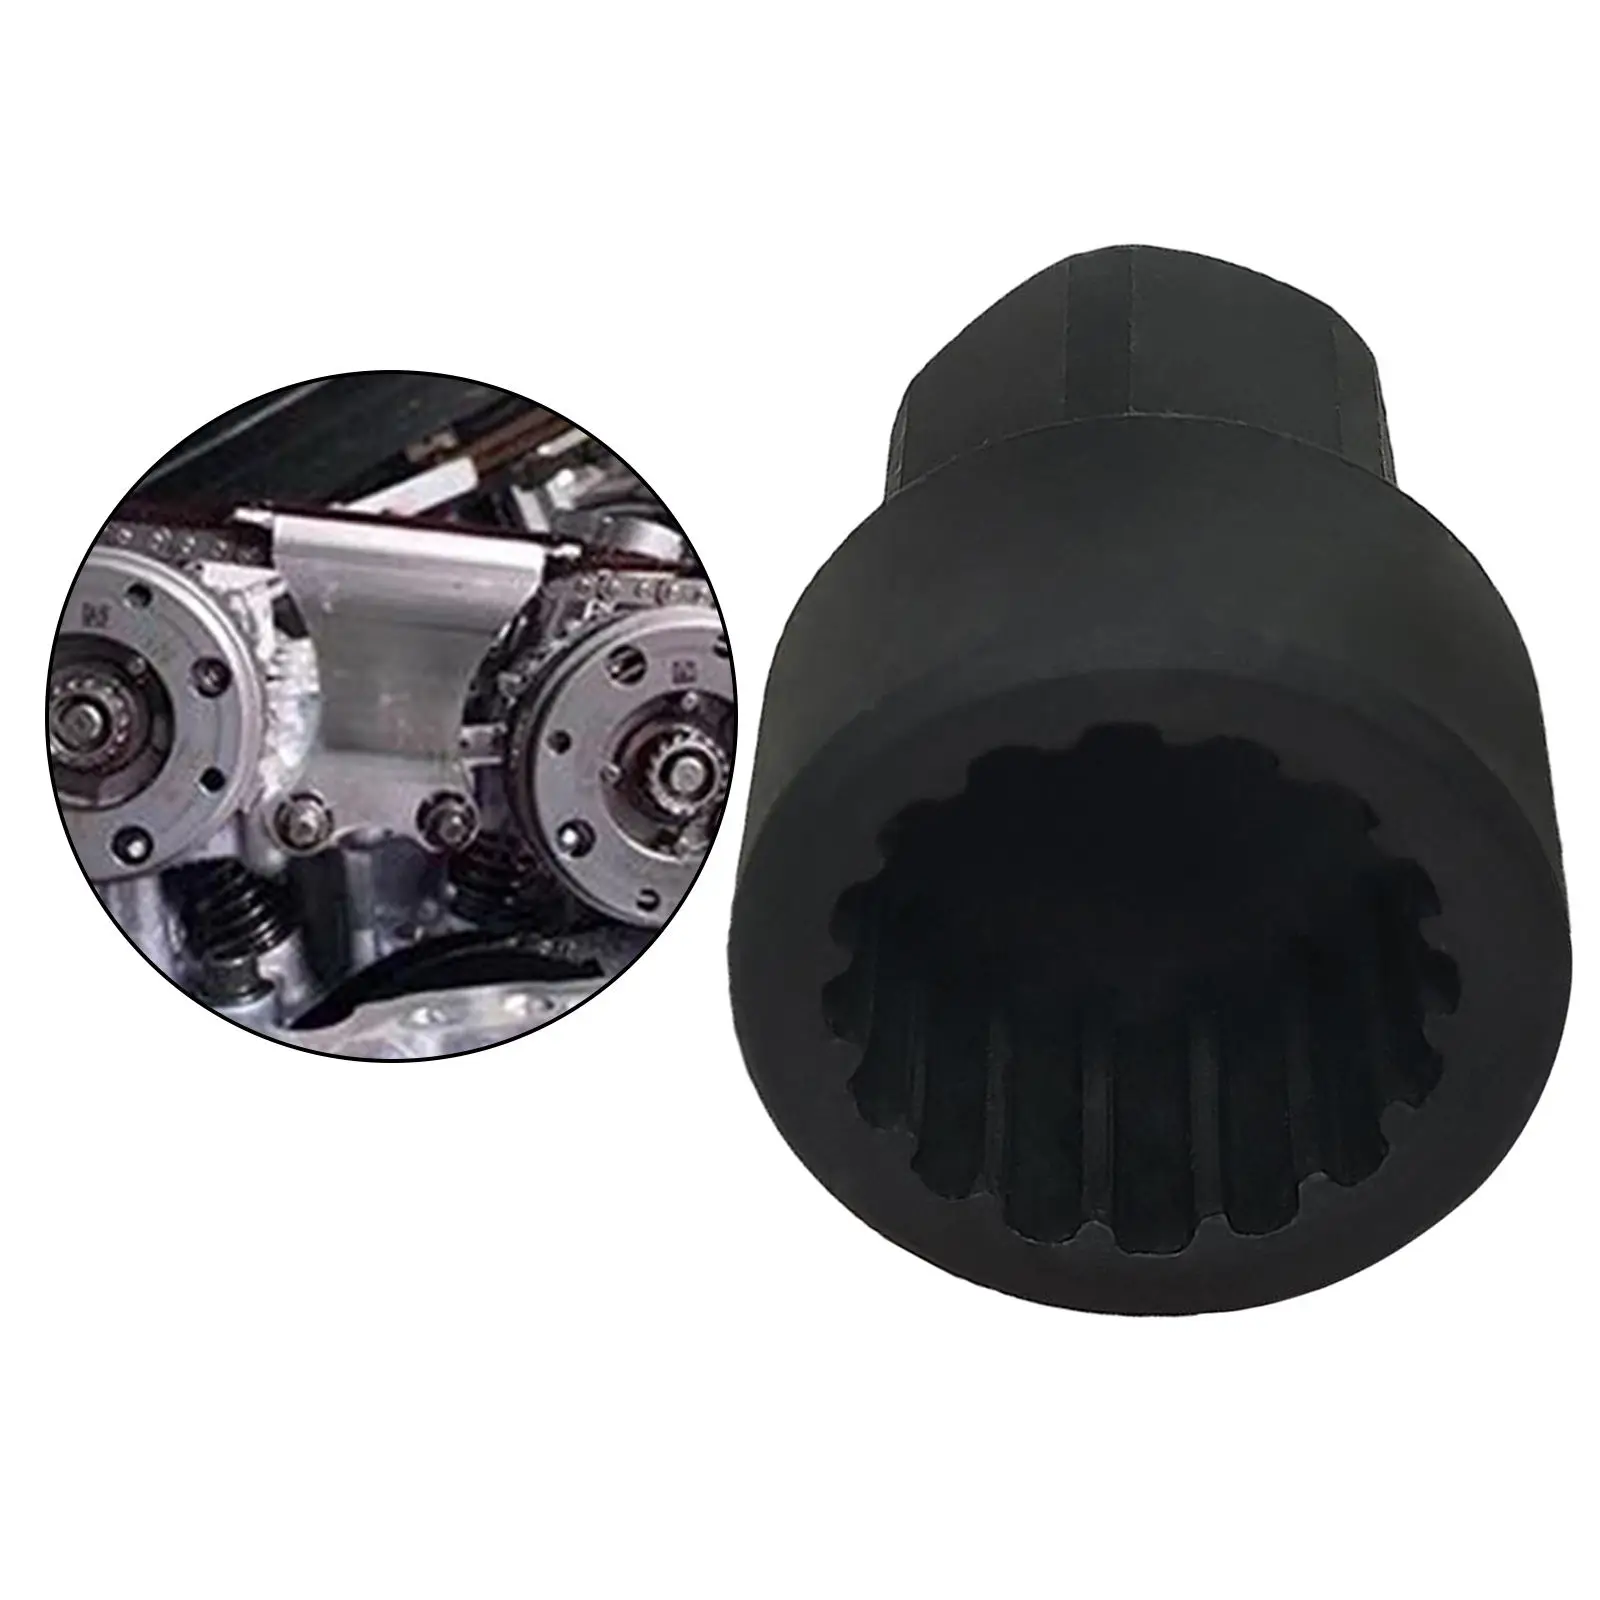 HIGHER Durable and Strong Camshaft  Socket 1/2in Dr x 22mm 16PT Replacement for